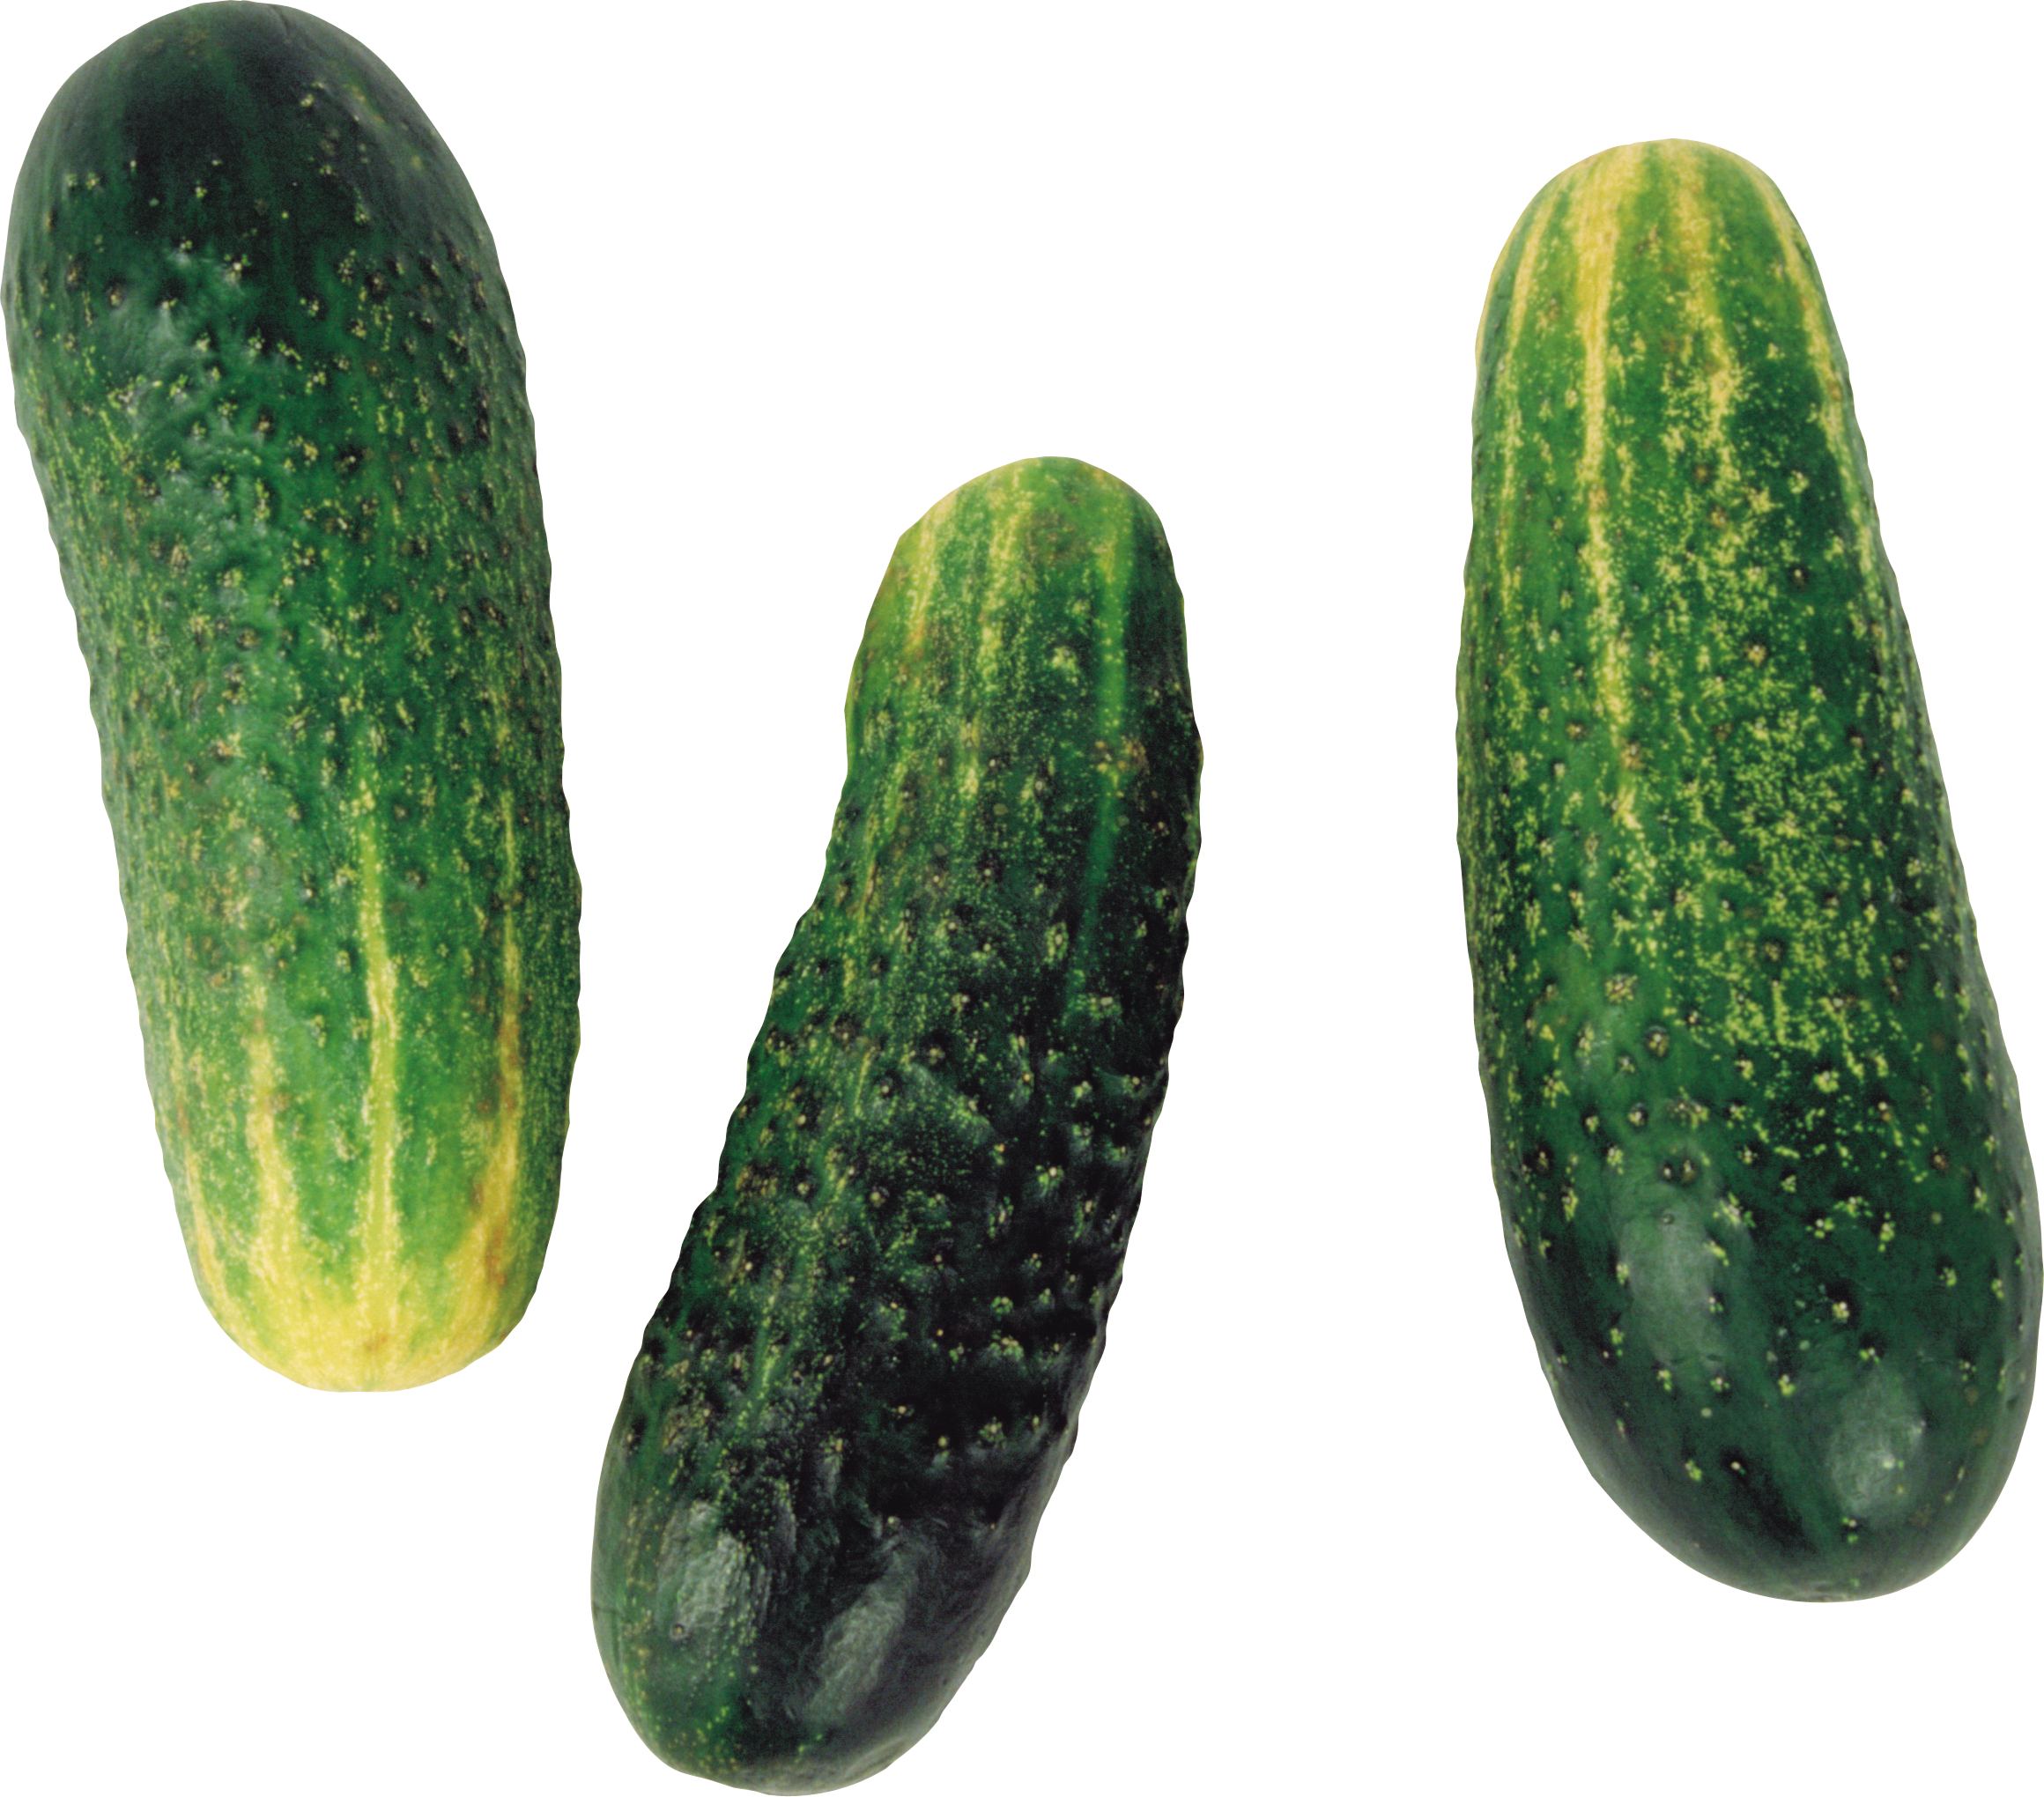 Cucumbers image PNG